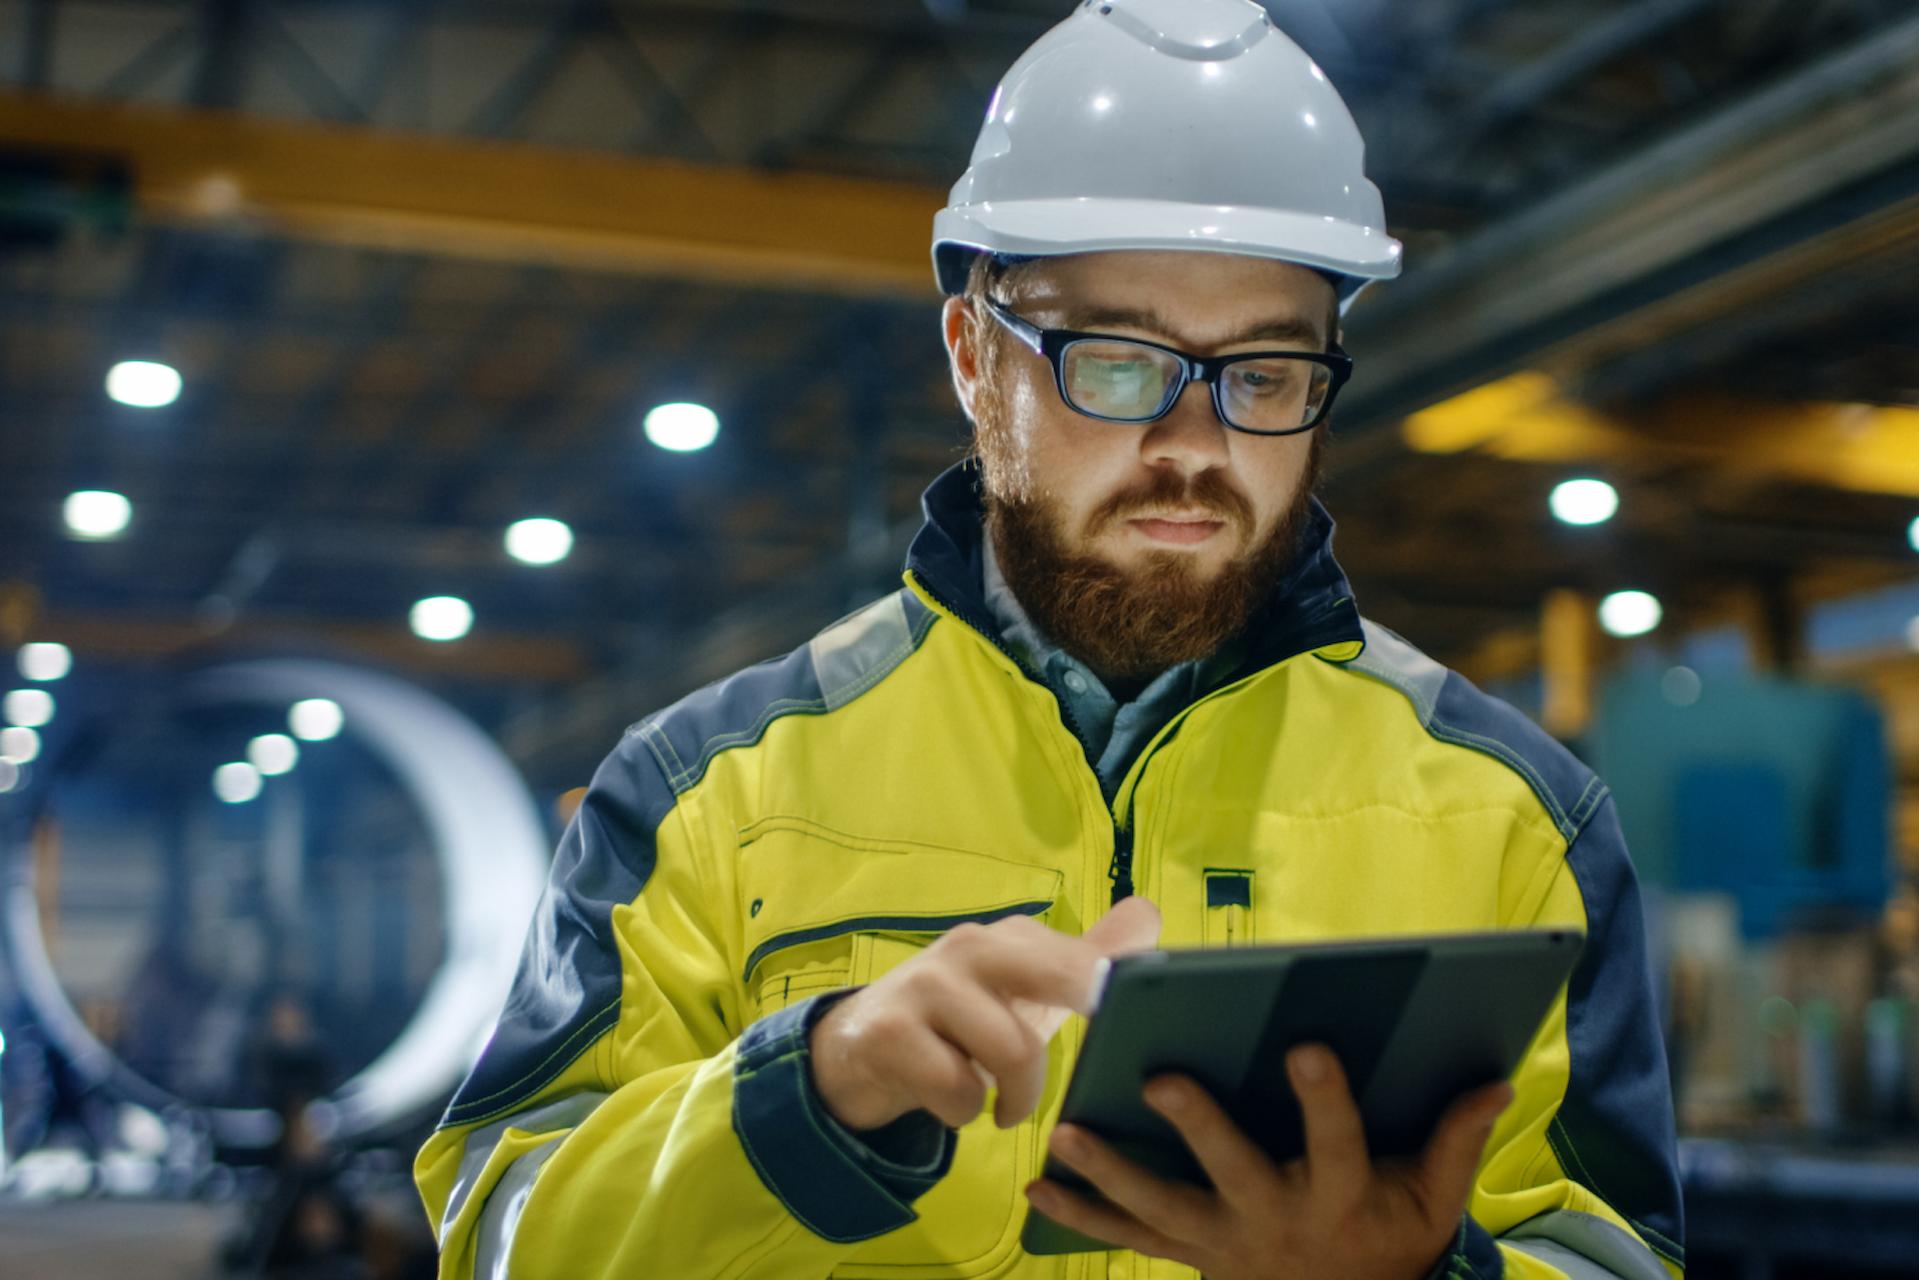 Improve Your Workforce’s Health and Safety with Better Software